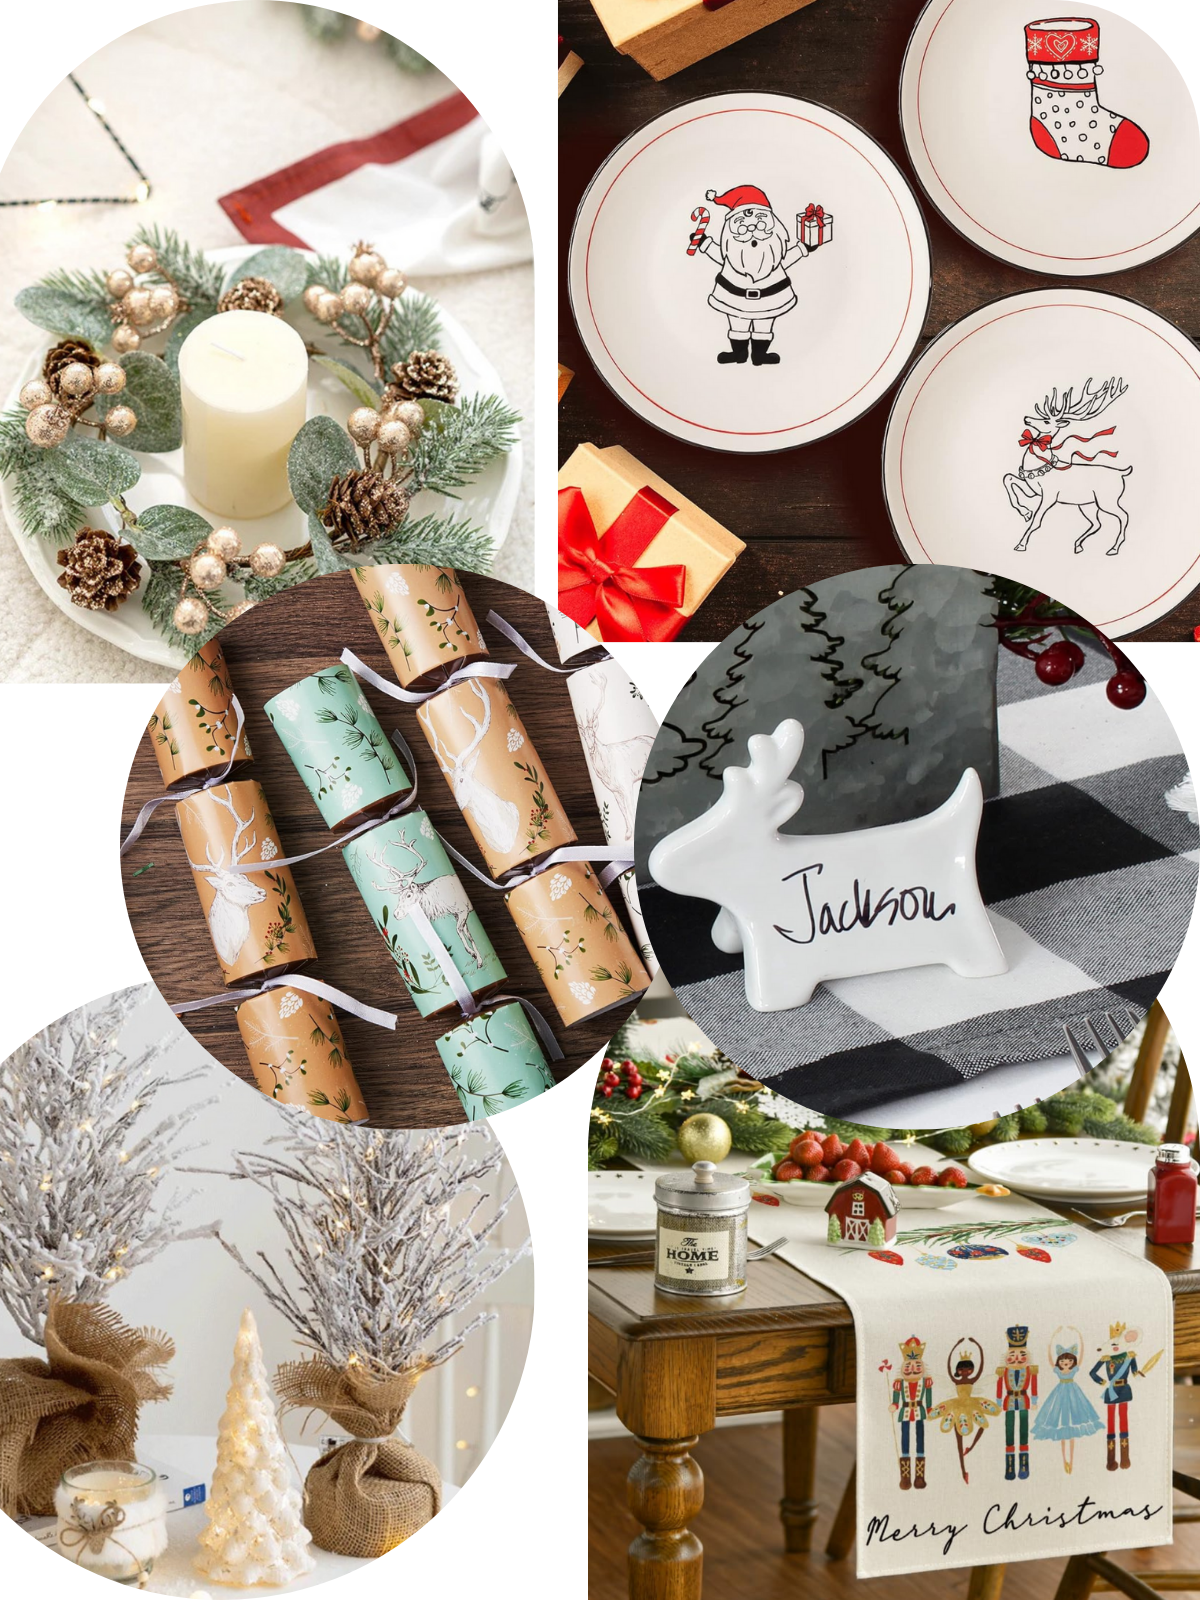 Top 10 Elegant Decor Ideas For Your Christmas Table Setting